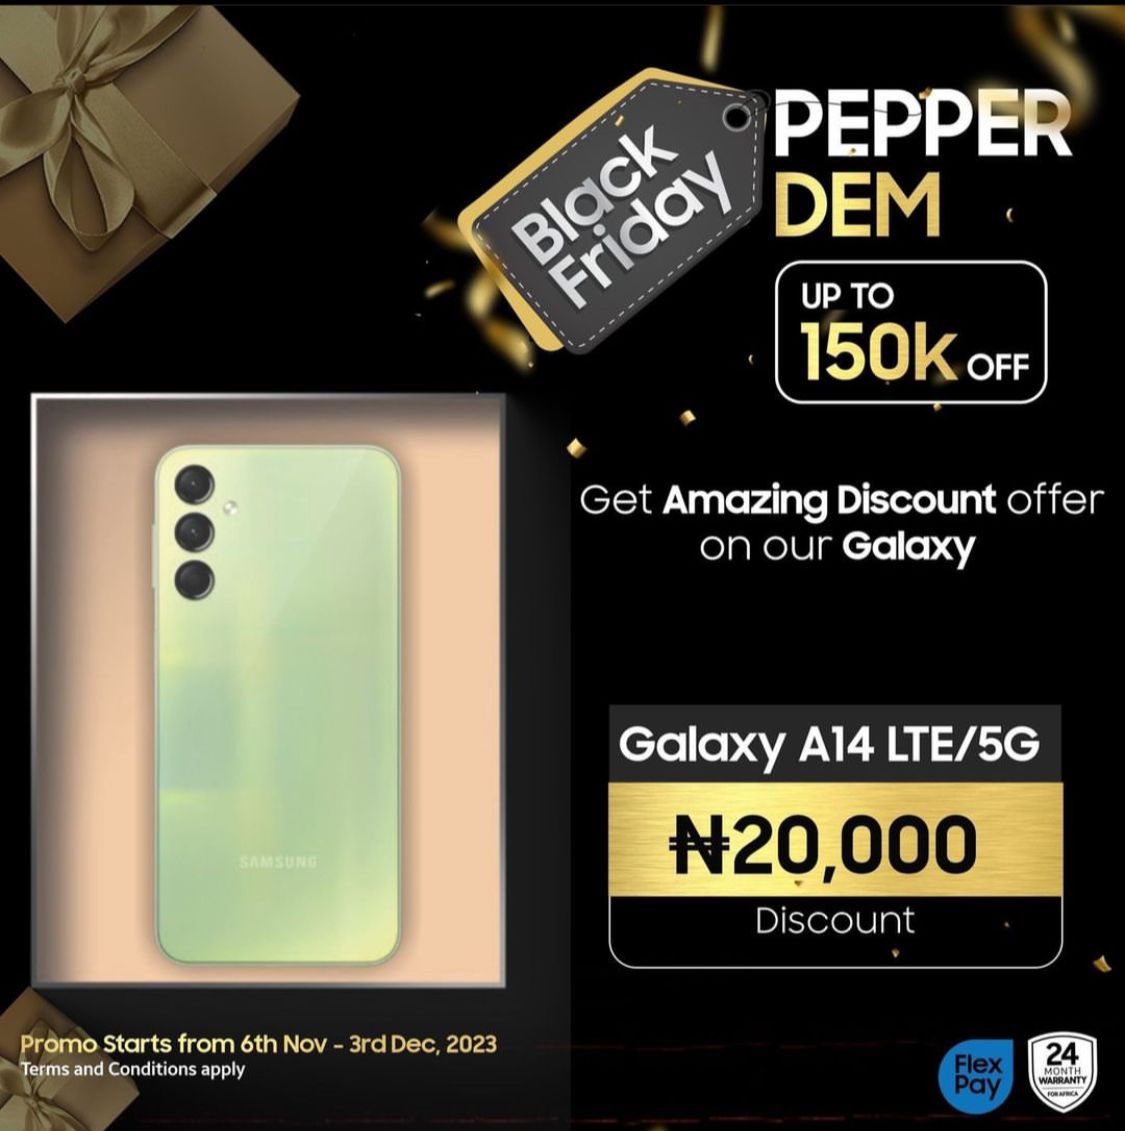 Its best to enjoy this awoof and suprise mumsy with the sleek #GalaxyA14 
She deserves a treat this holiday period #SamsungBlackFriday